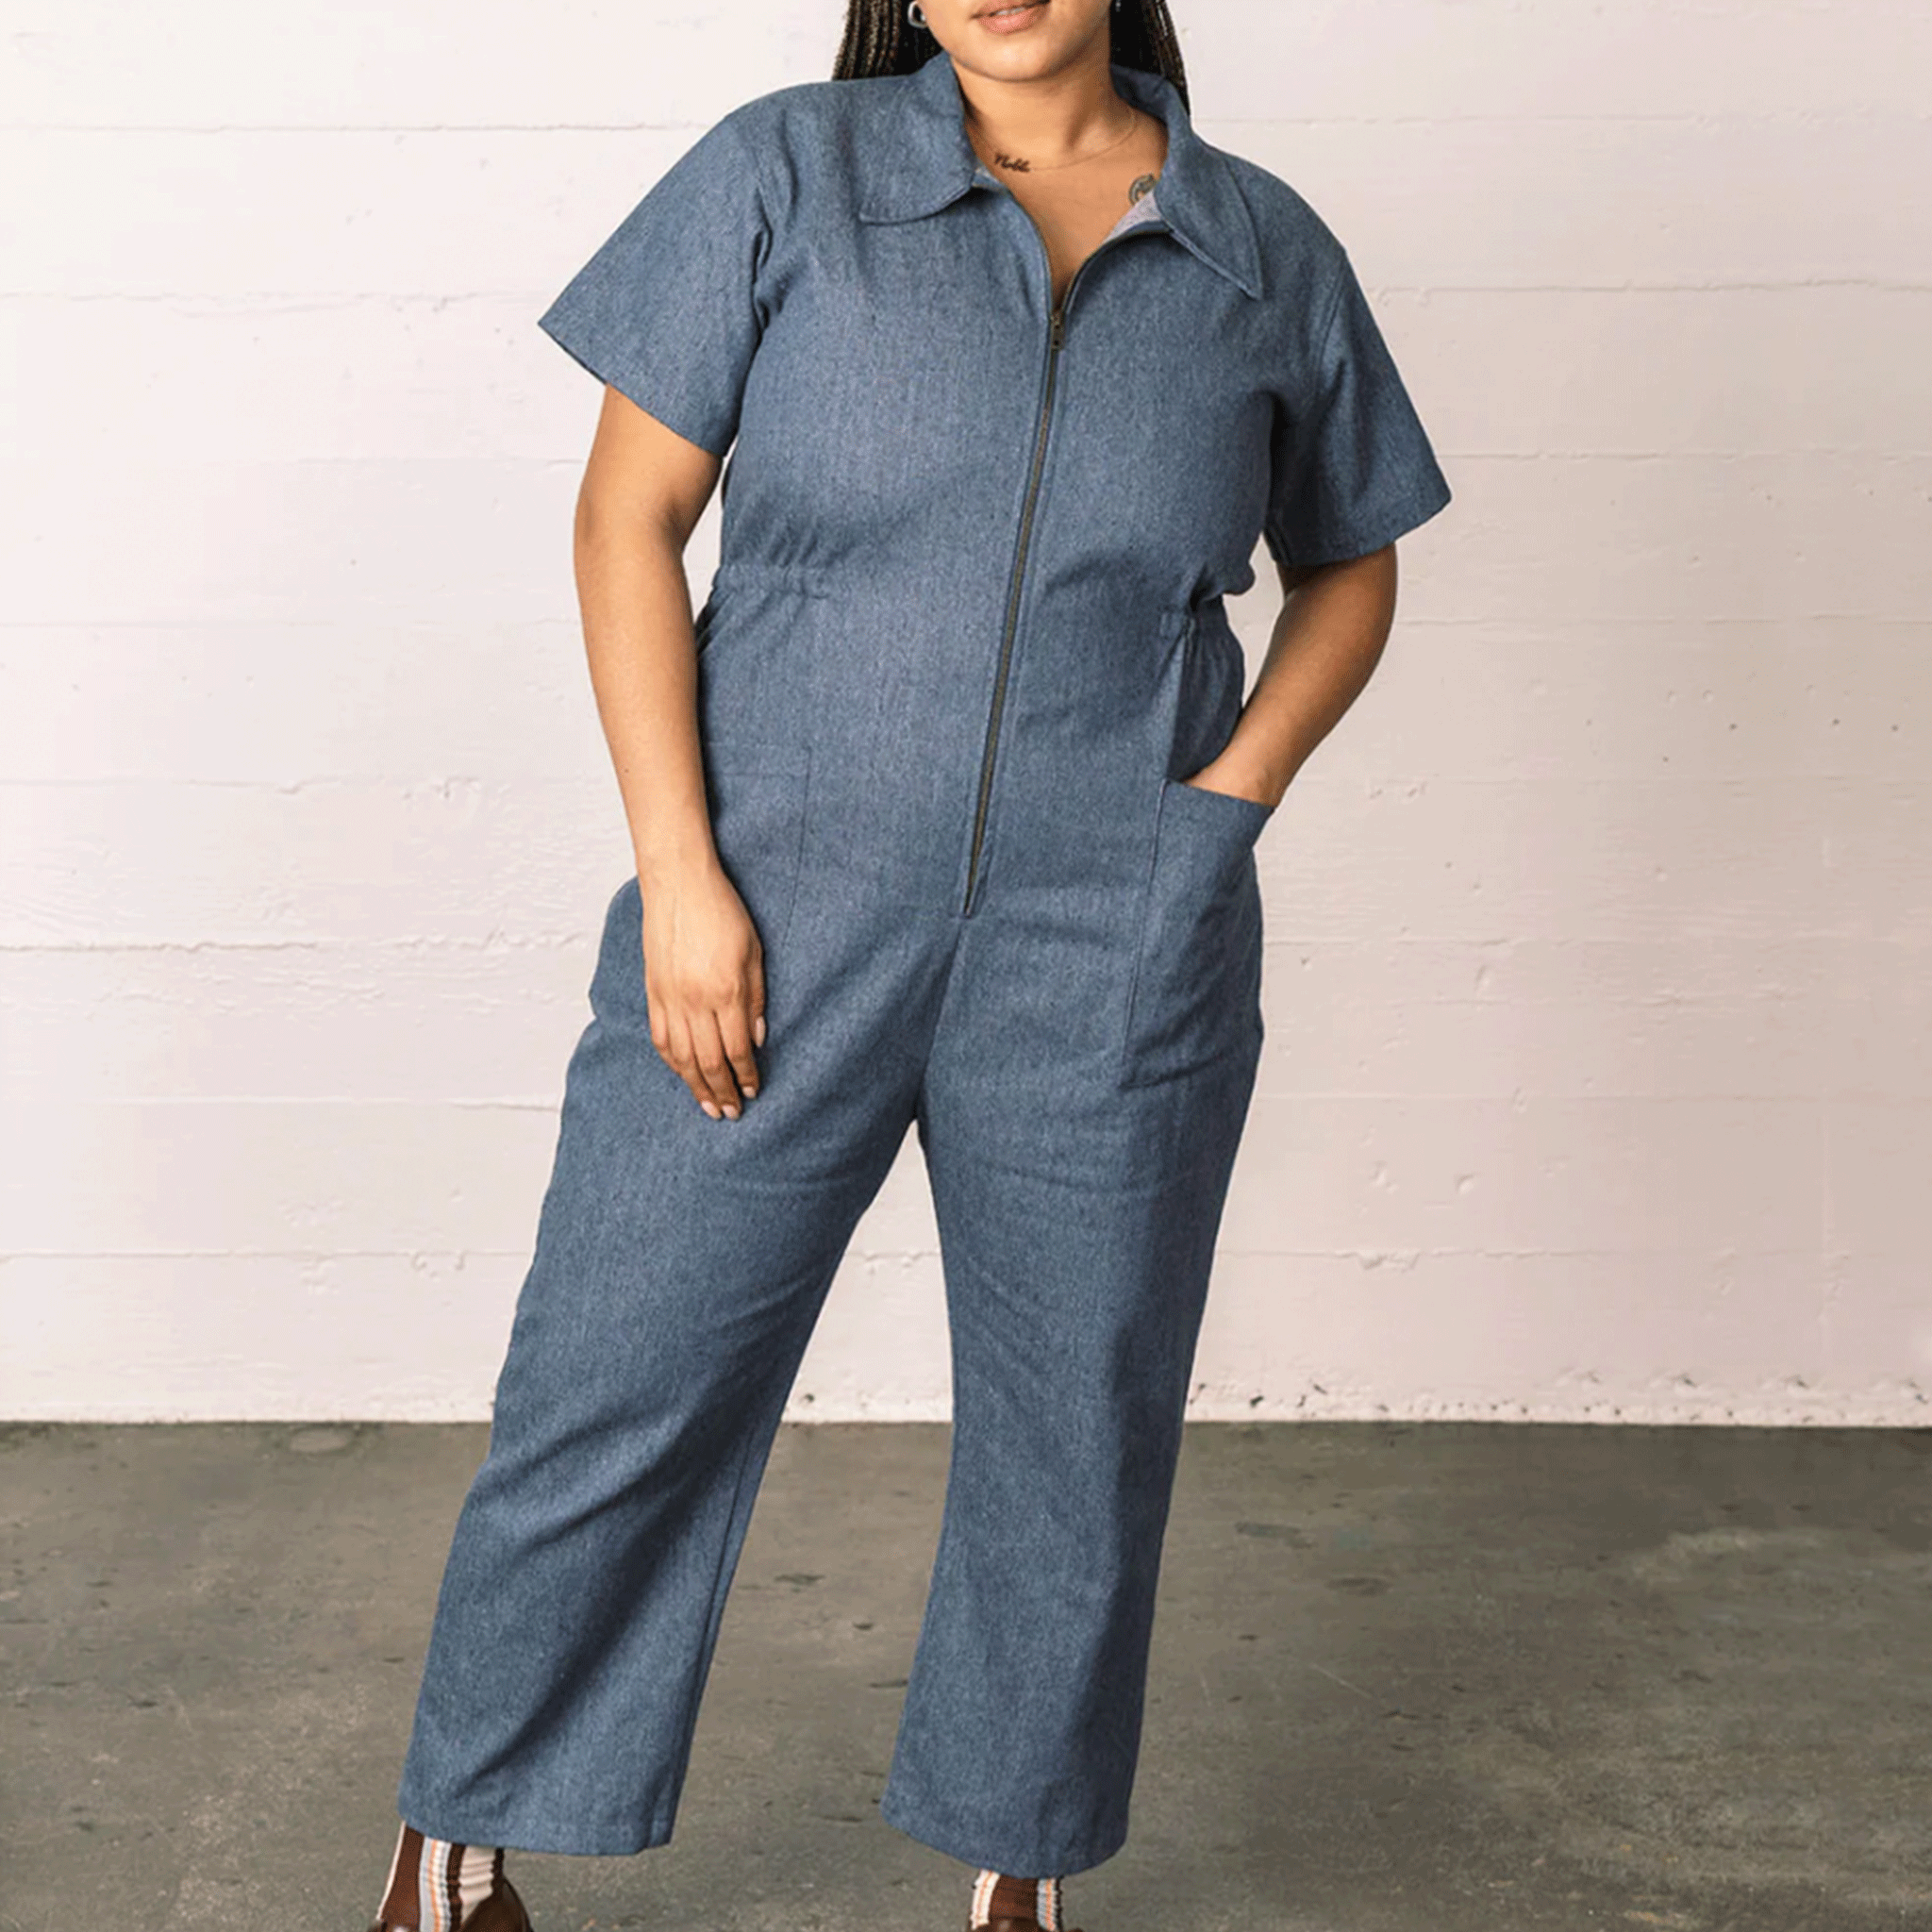 On a neutral background is a model wearing a denim short sleeved jumpsuit with a front zipper and a collar. 